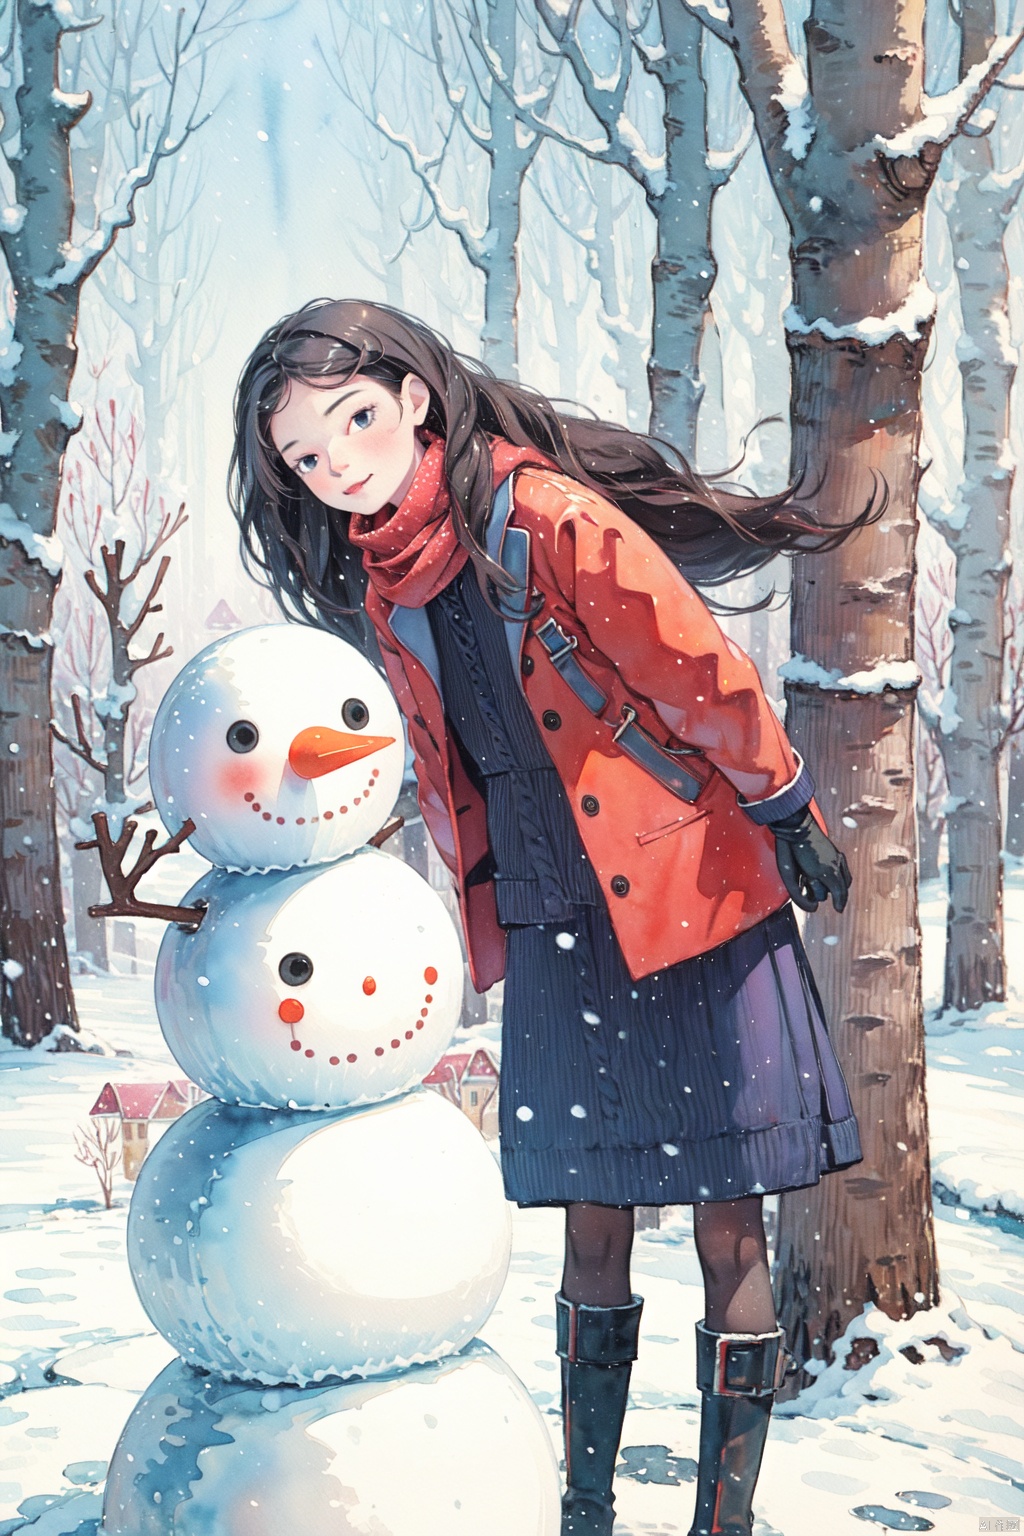 A girl with long hair, a scarf, a red coat, gloves, boots, she is a snowman, the forest is in the distance, it is snowing,watercolor